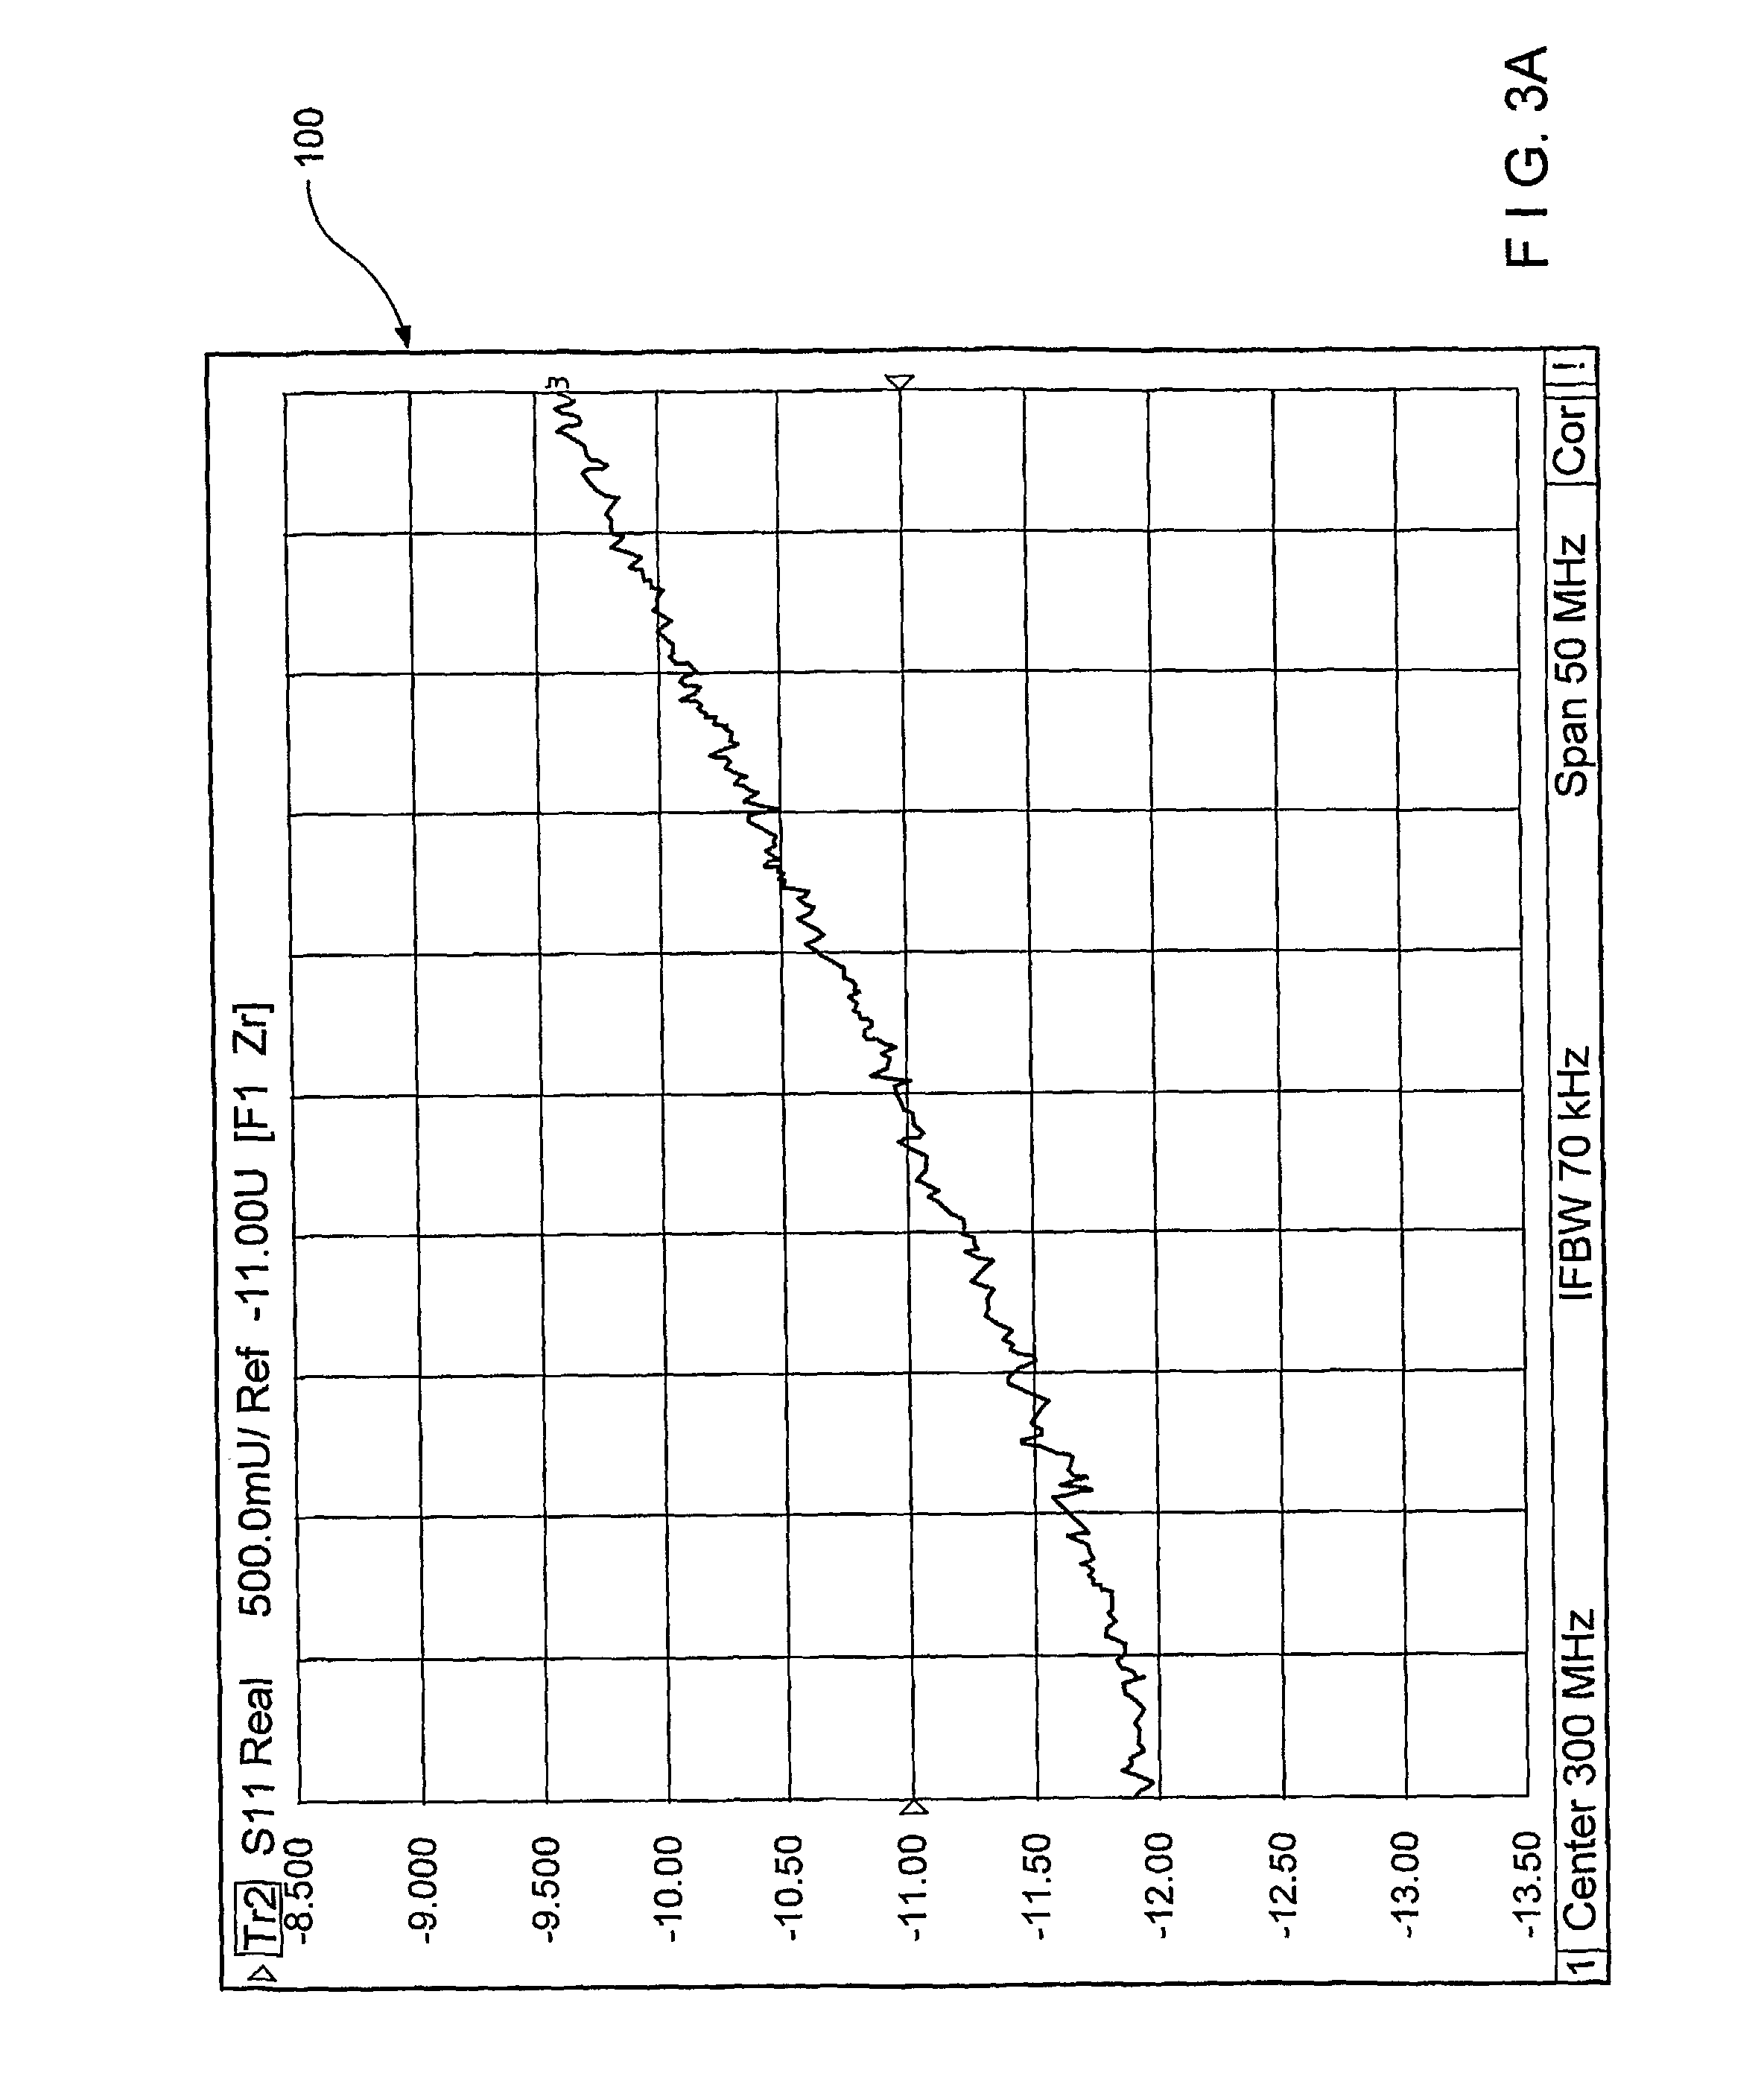 Active radio frequency coil providing negative resistance for high field magnetic resonance imaging